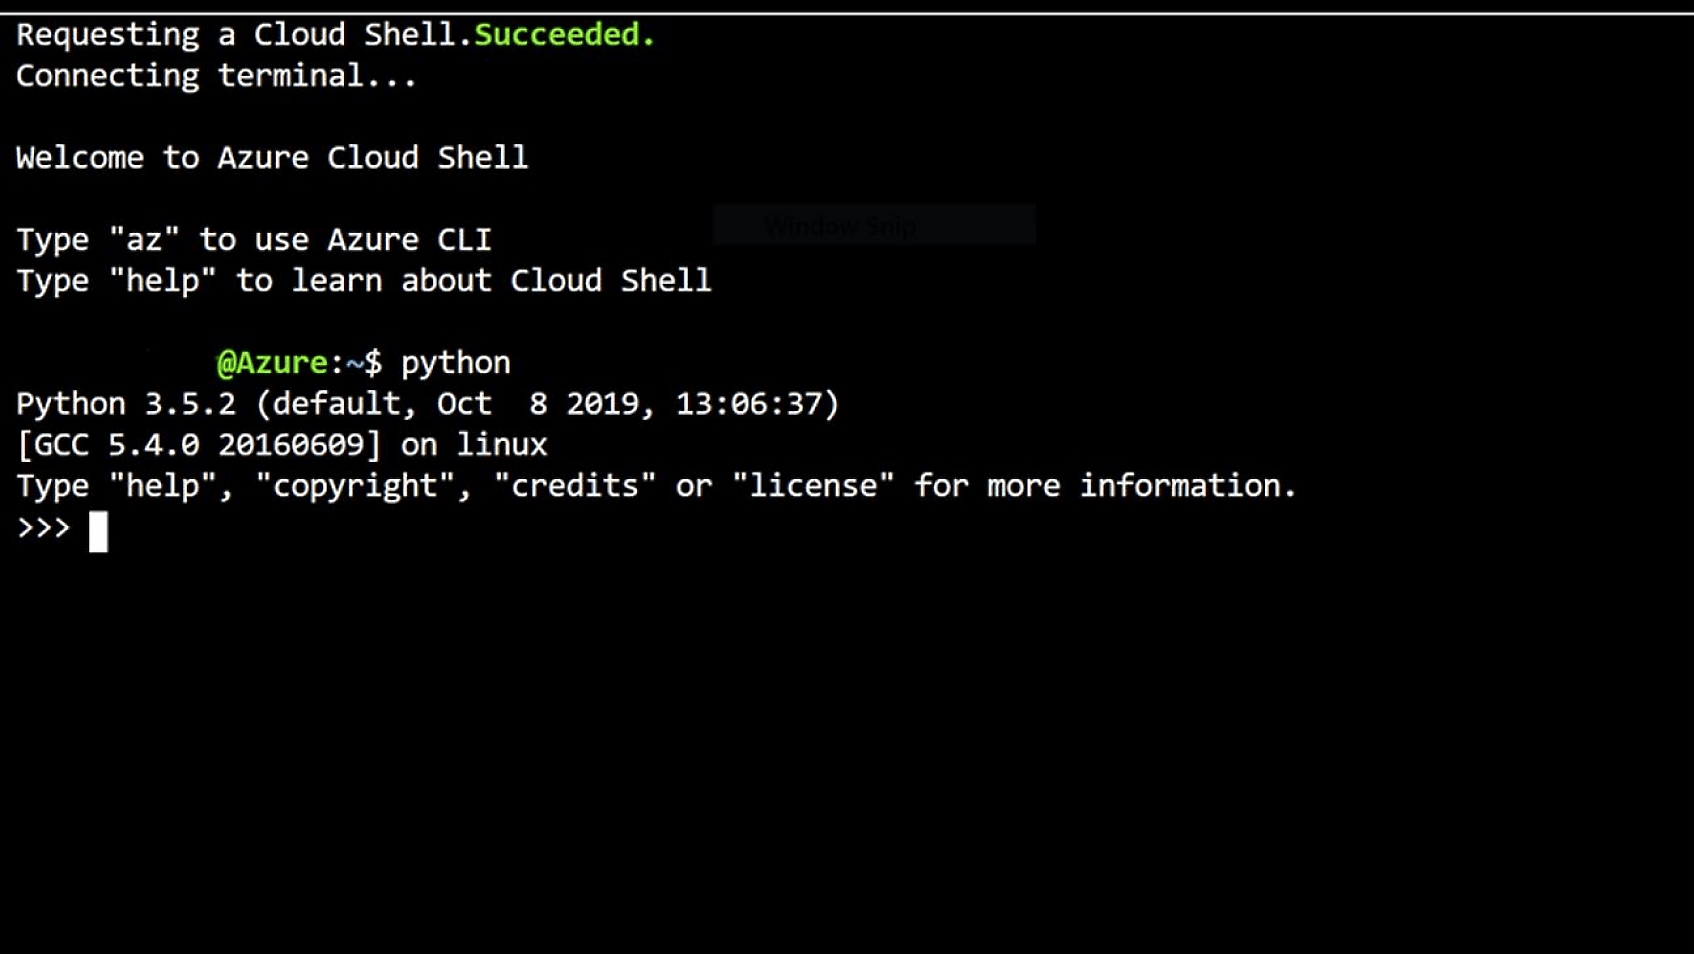 Connecting to the Azure Cloud Shell terminal and the accompanying welcome message.